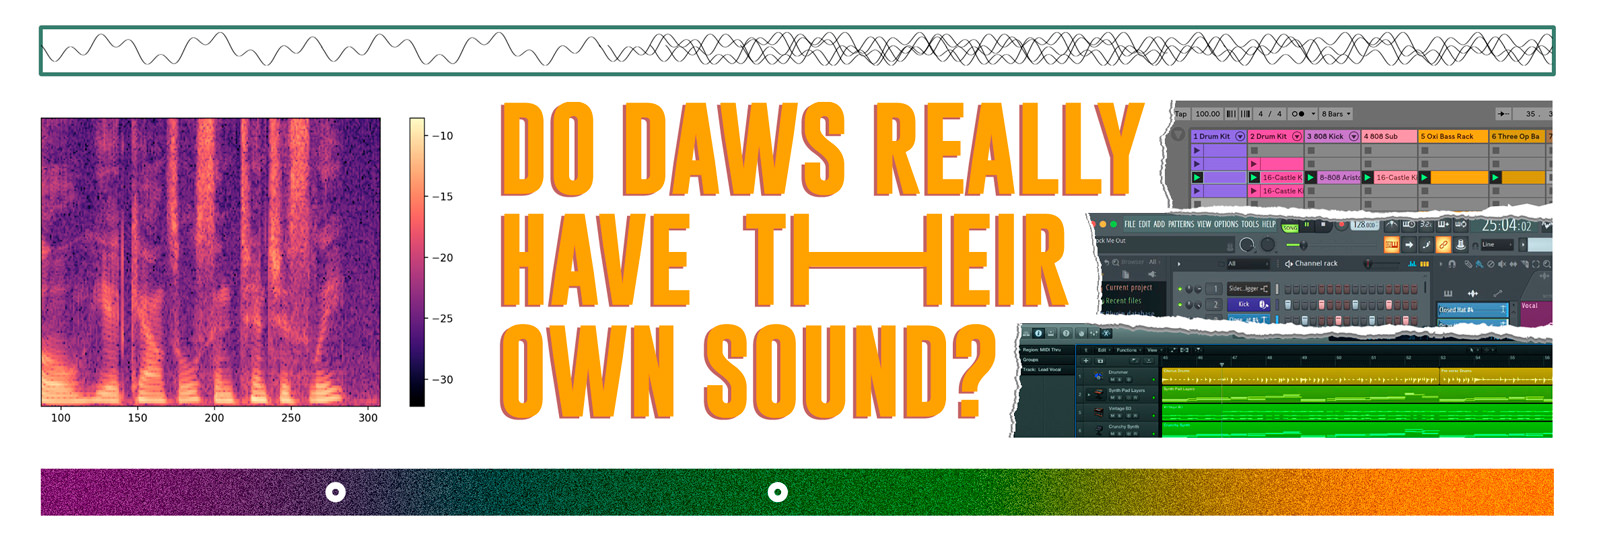 Do DAWs Really Have Their Own Sound? - Attack Magazine